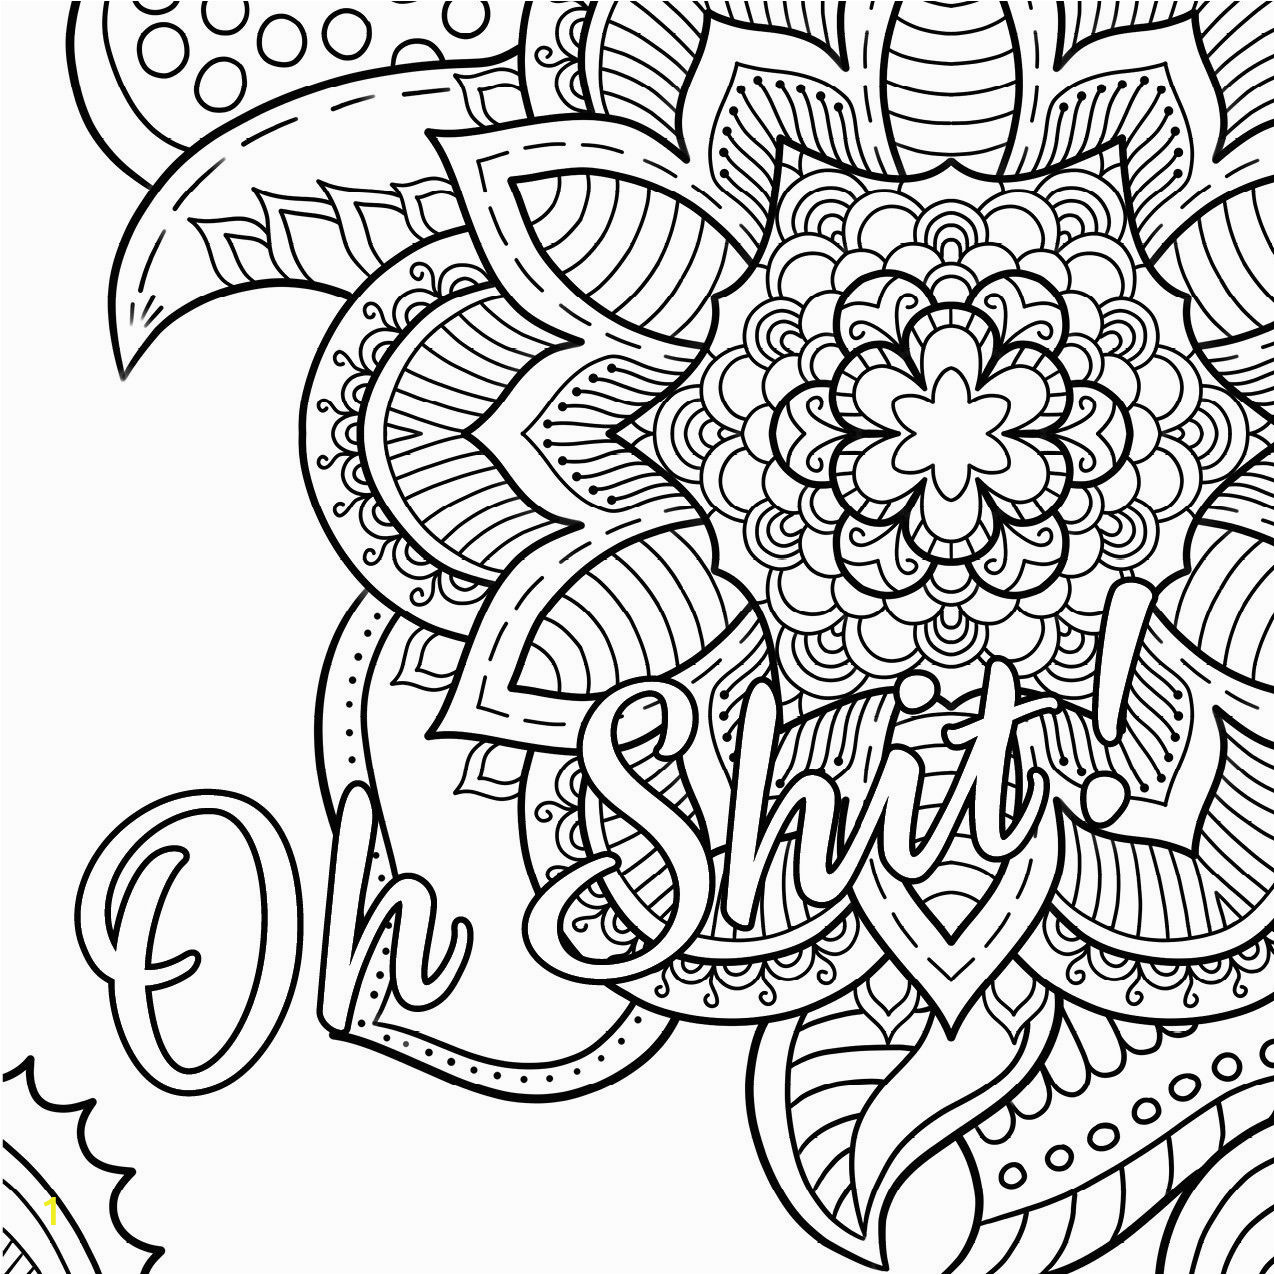 swear word coloring book 2 free printable coloring pages for